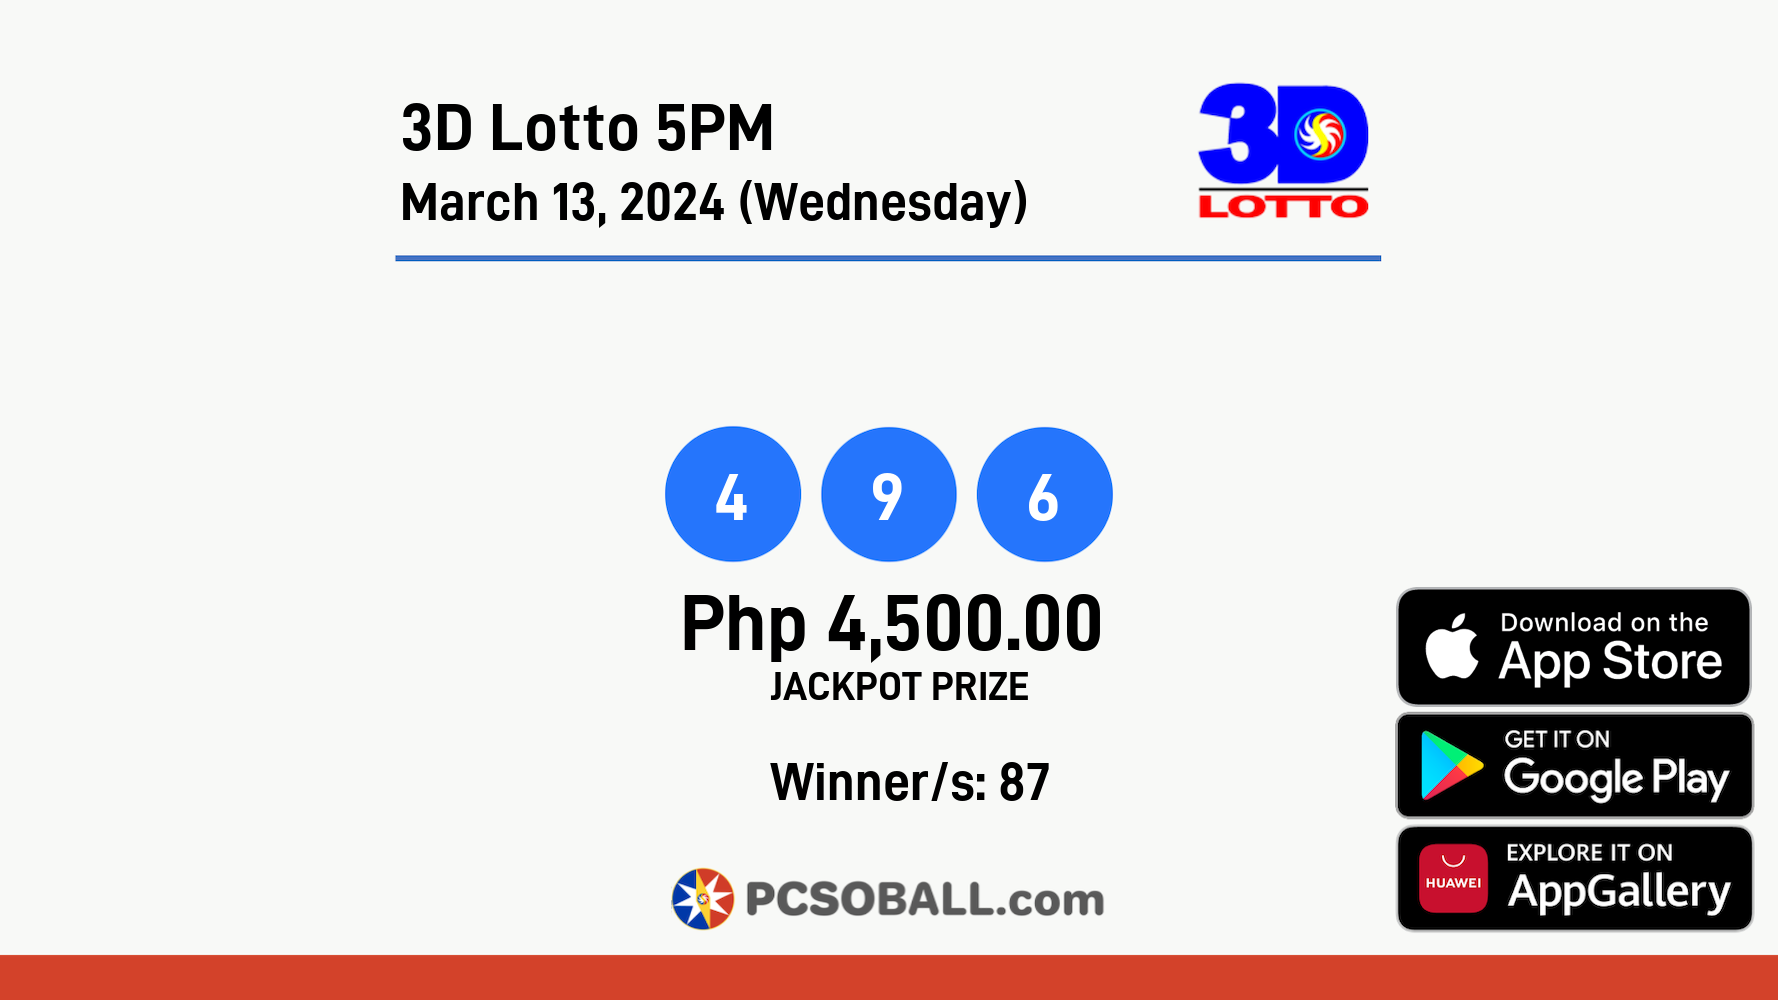 3D Lotto 5PM March 13, 2024 (Wednesday) Result